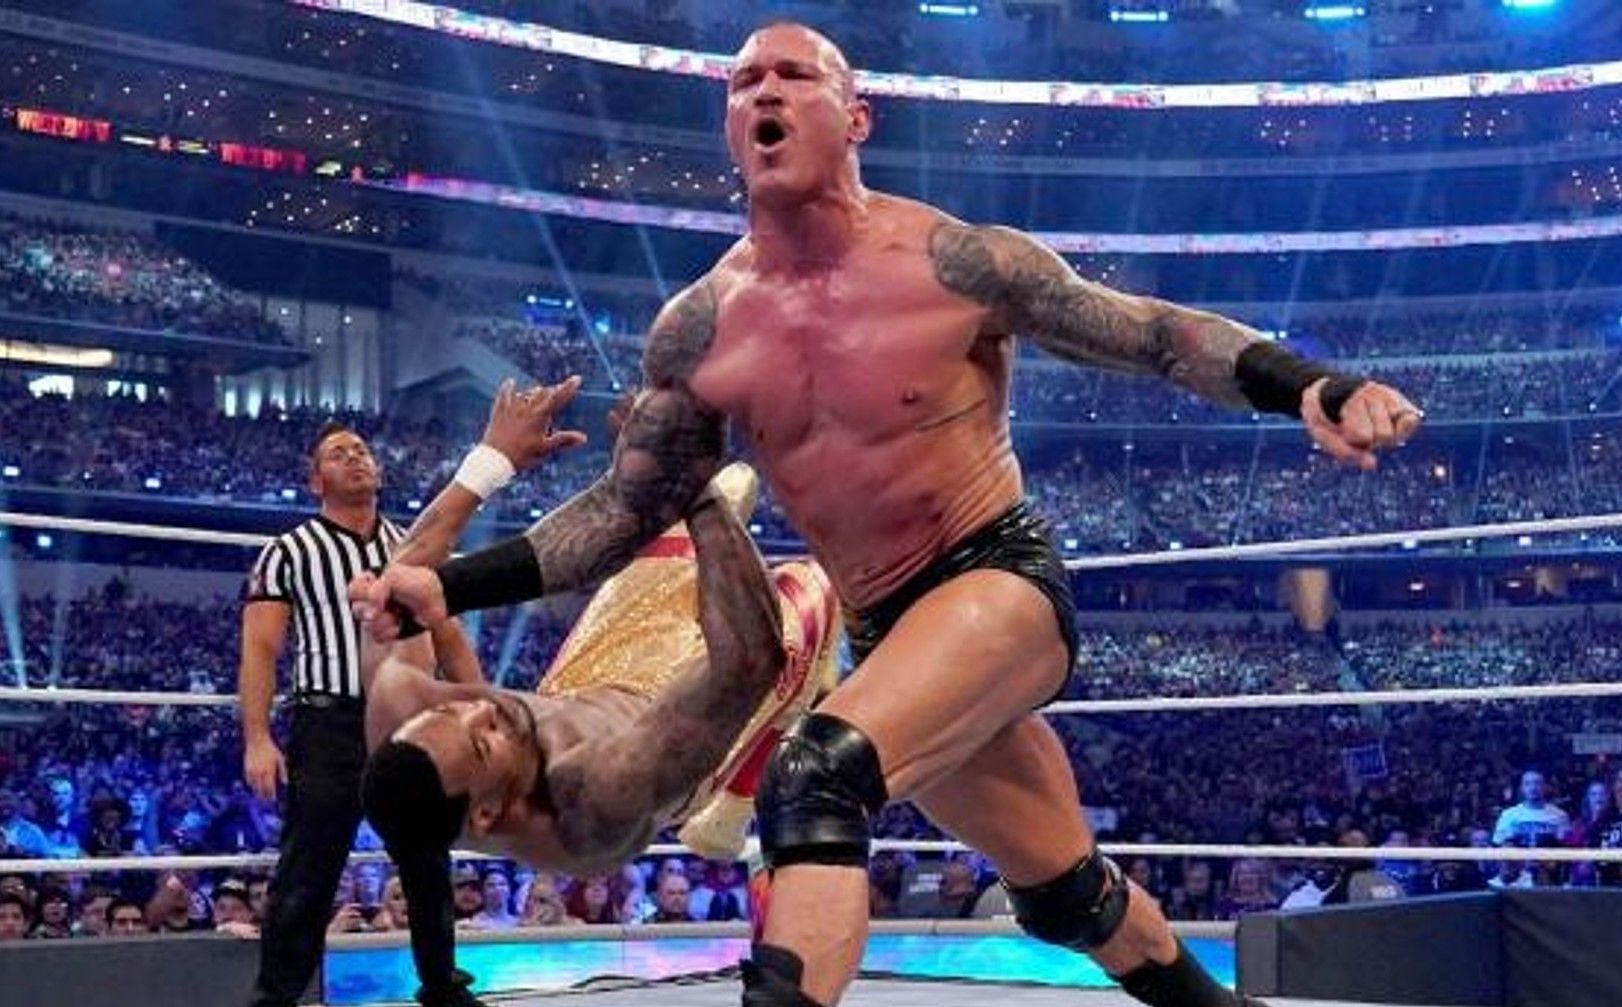 Randy Orton is looking for another big moment at a Royal Rumble event.